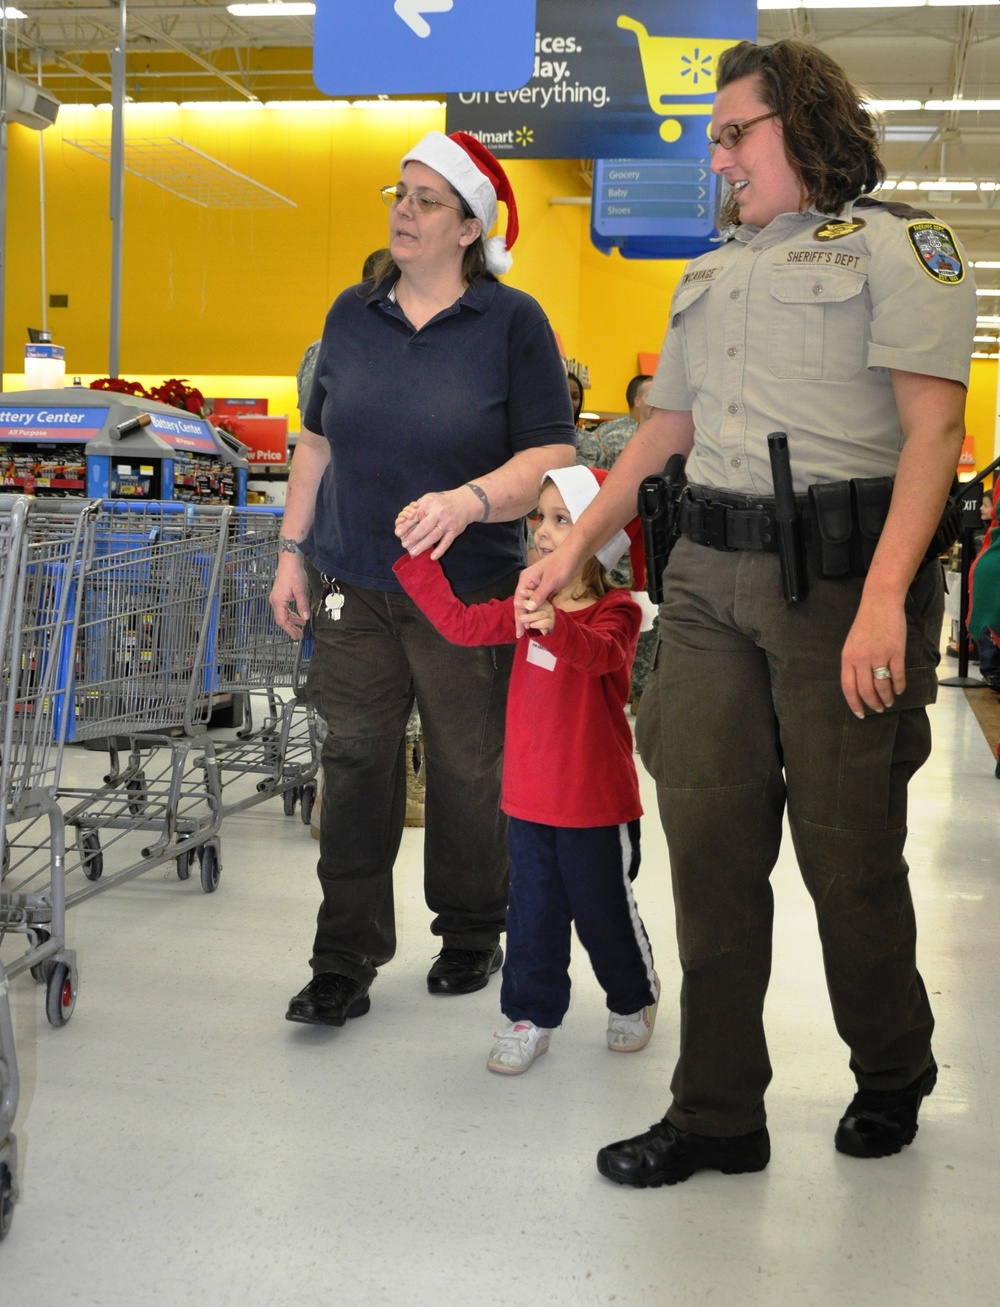 ‘Shop with a Cop’ brightens holidays for local children